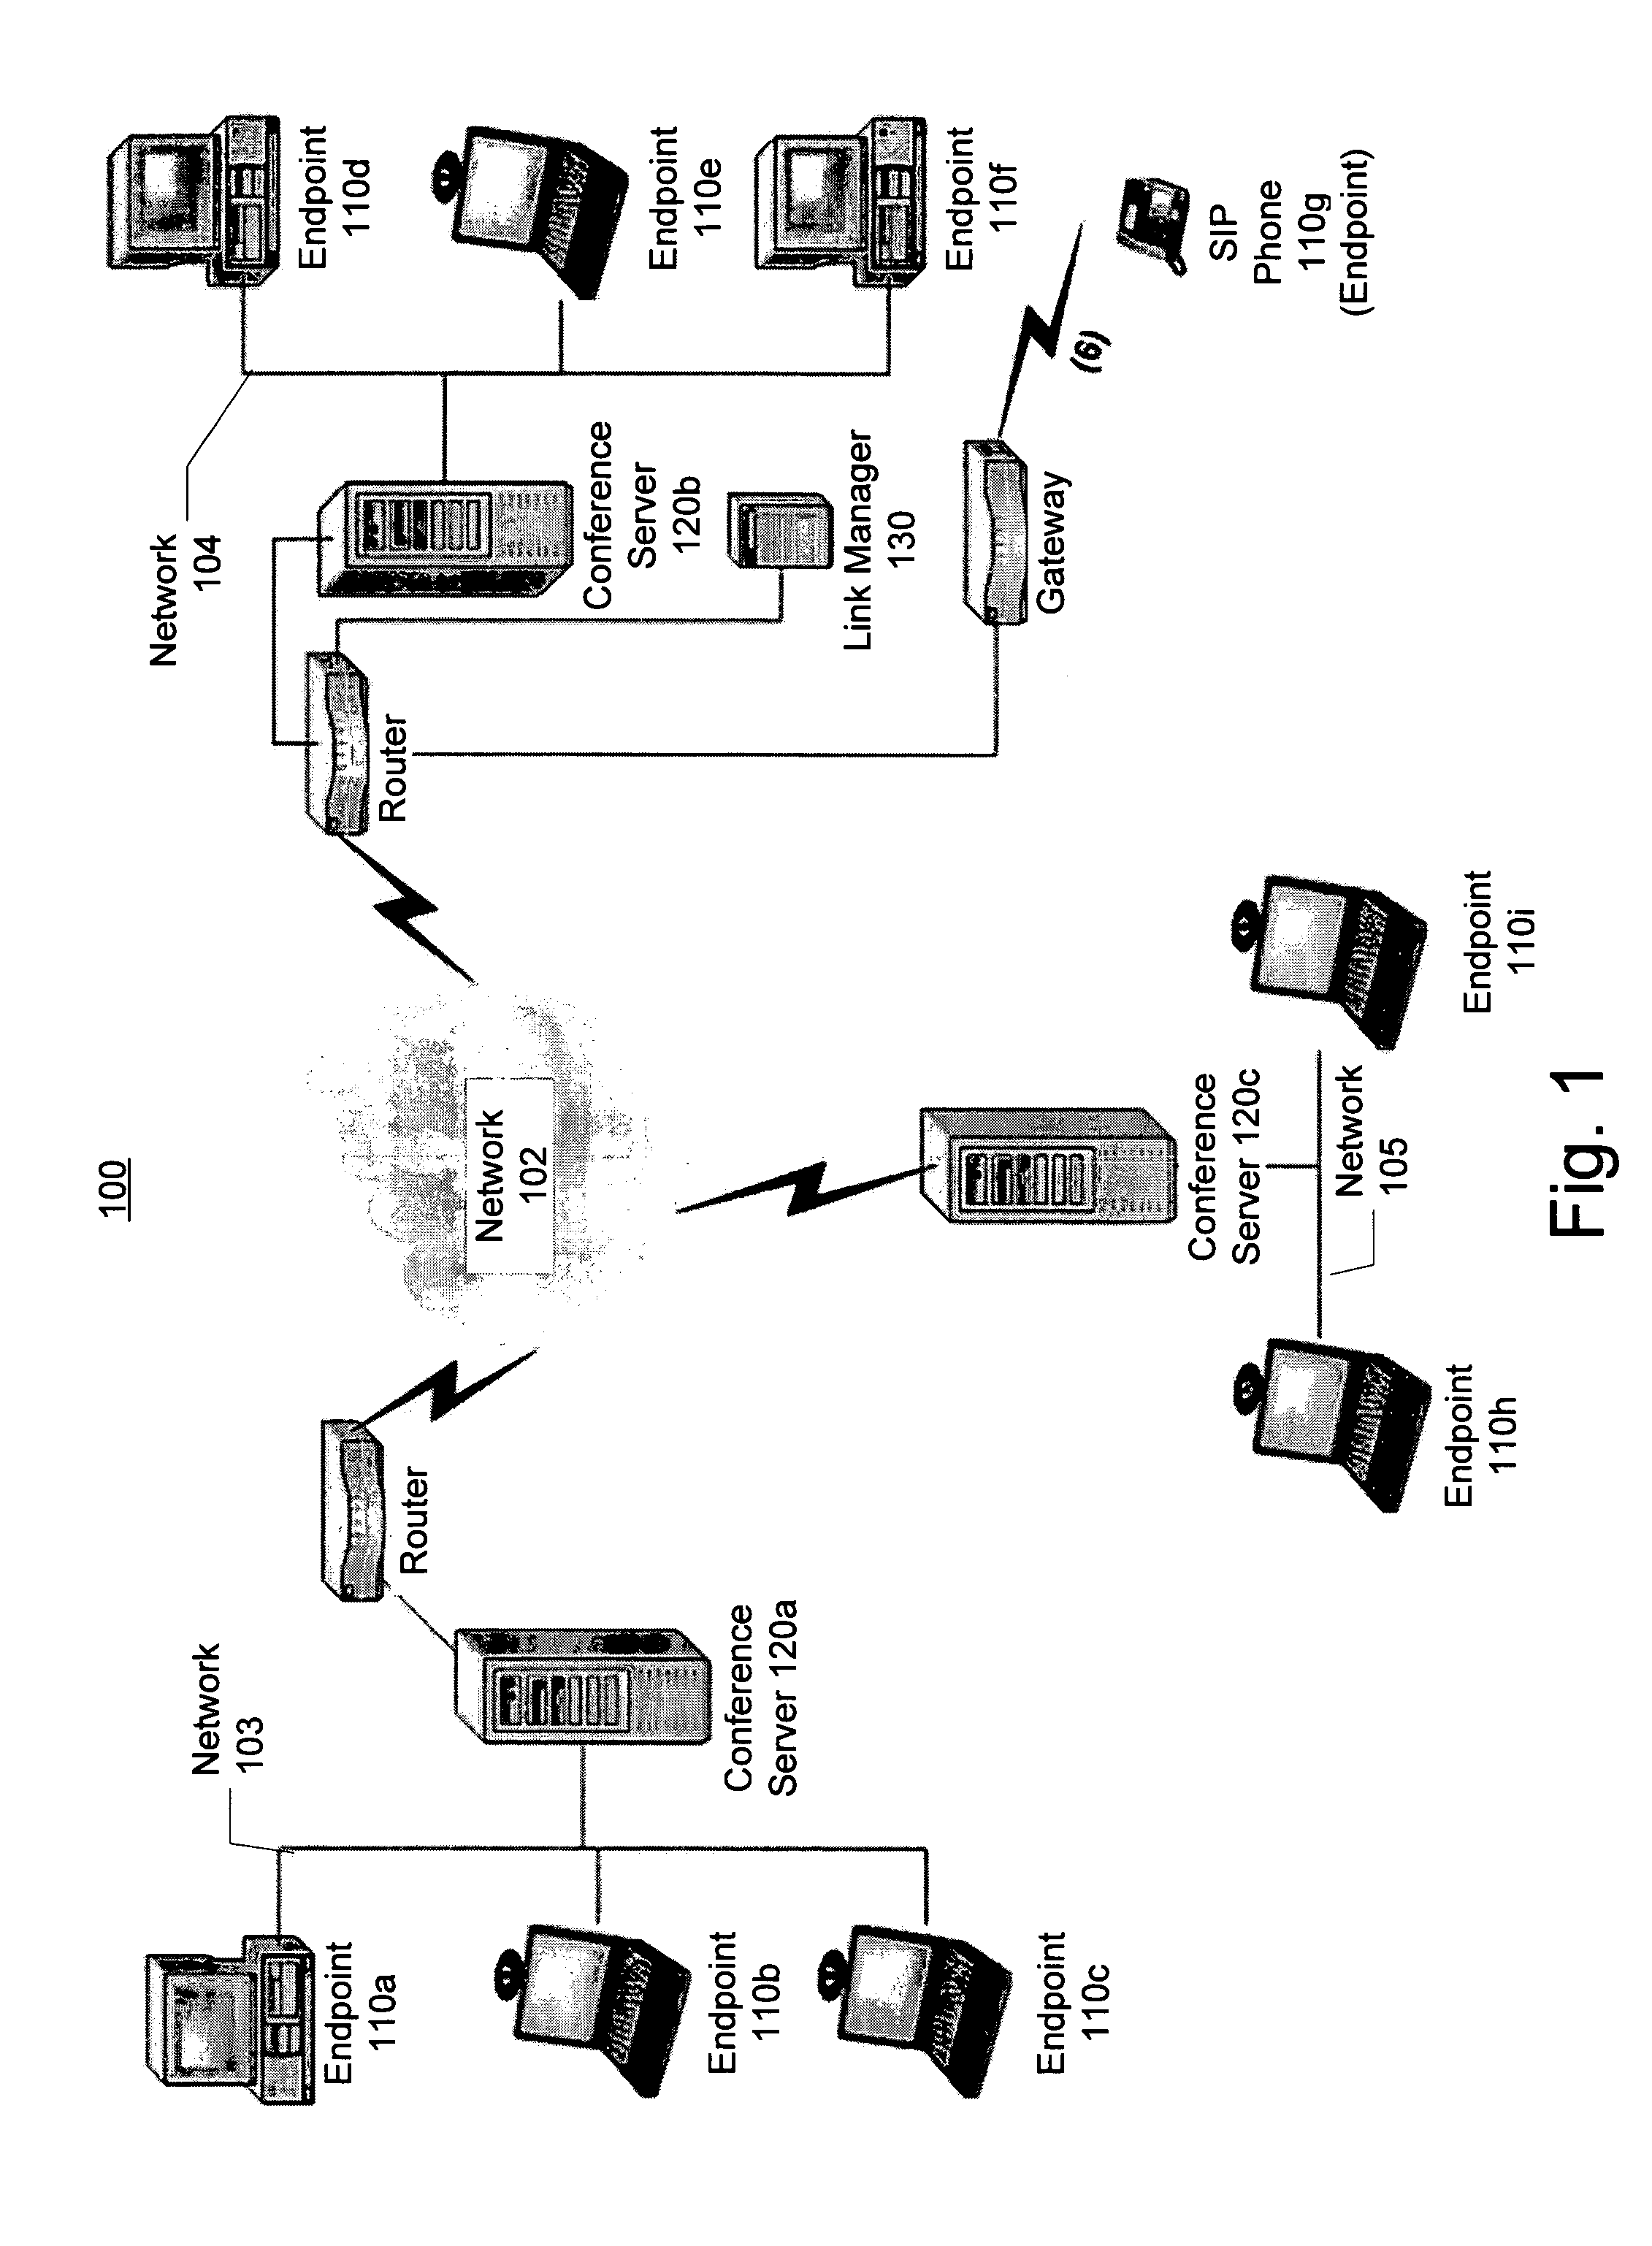 System and method for distributed multipoint conferencing with automatic endpoint address detection and dynamic endpoint-server allocation